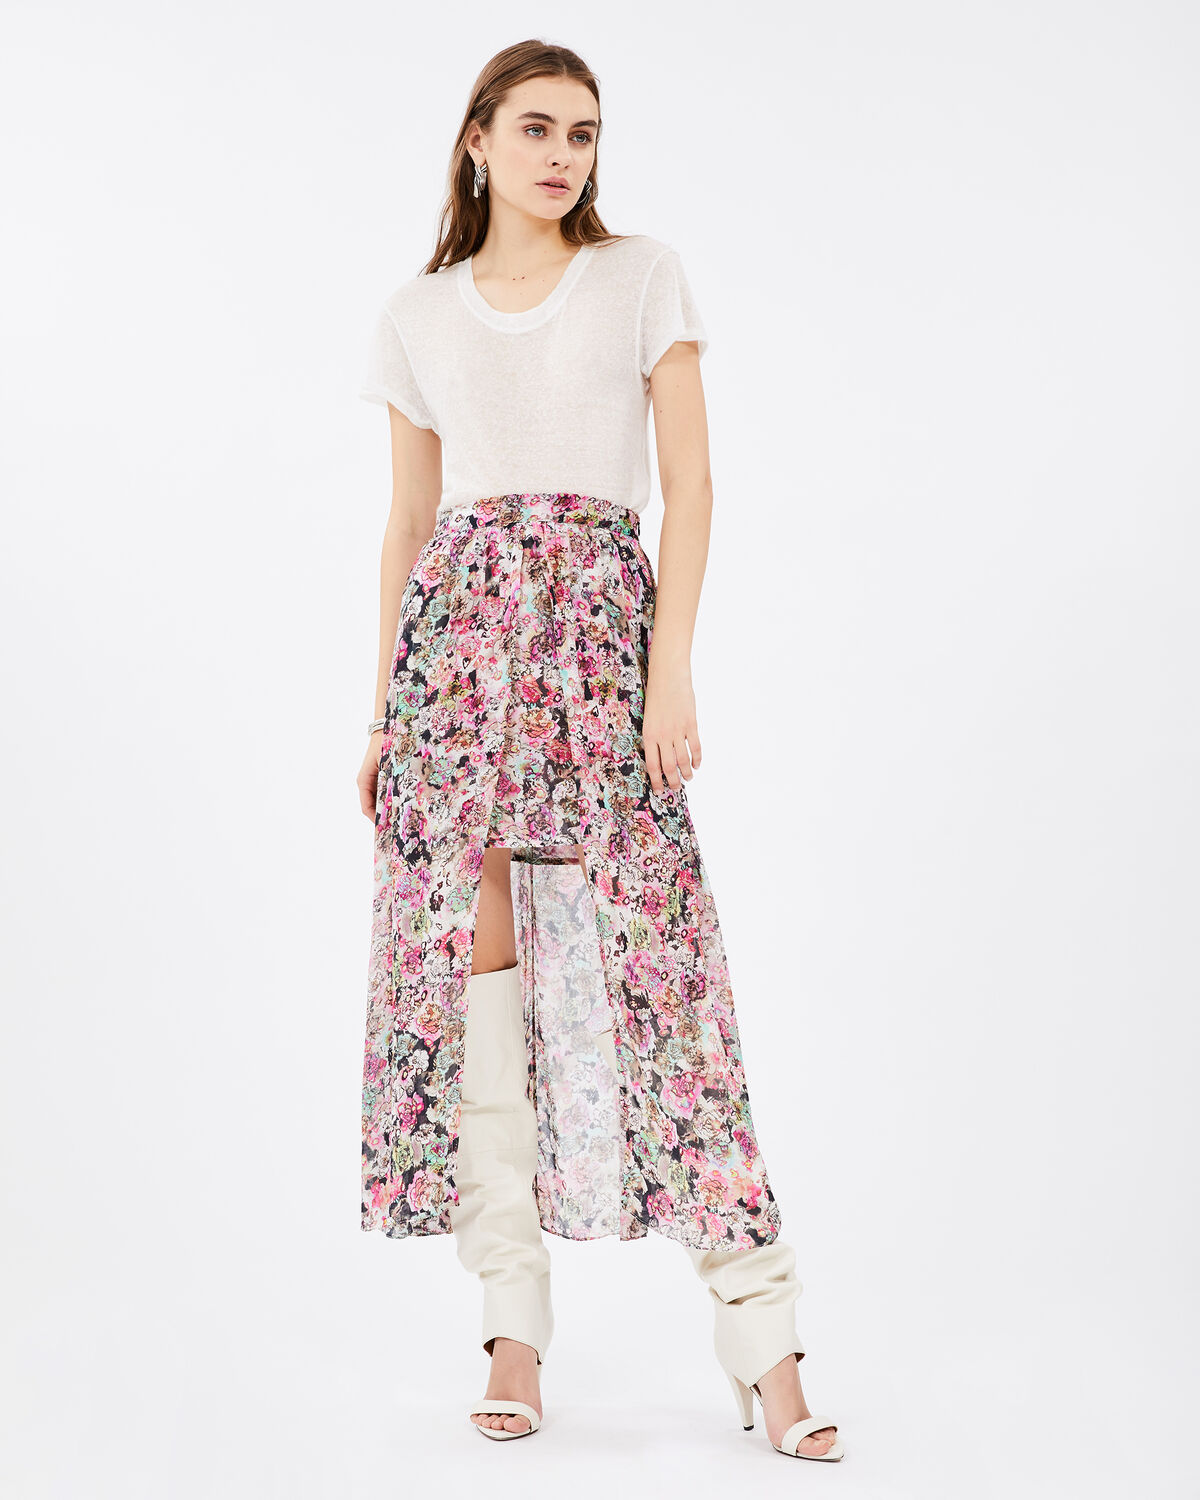 Photo of IRO Paris Trent Skirt Pink - With Its Elastic Waist, This Long, Fluid And Airy Skirt Is Distinguished By Its Floral Print And Asymmetry. Enhanced By Its Play Of Transparency Due To Its Petticoat, It Enhances Your Silhouette In All Circumstances. Wear It With A Linen T-shirt And A Pair Of Boots For A Sunny Look. New In